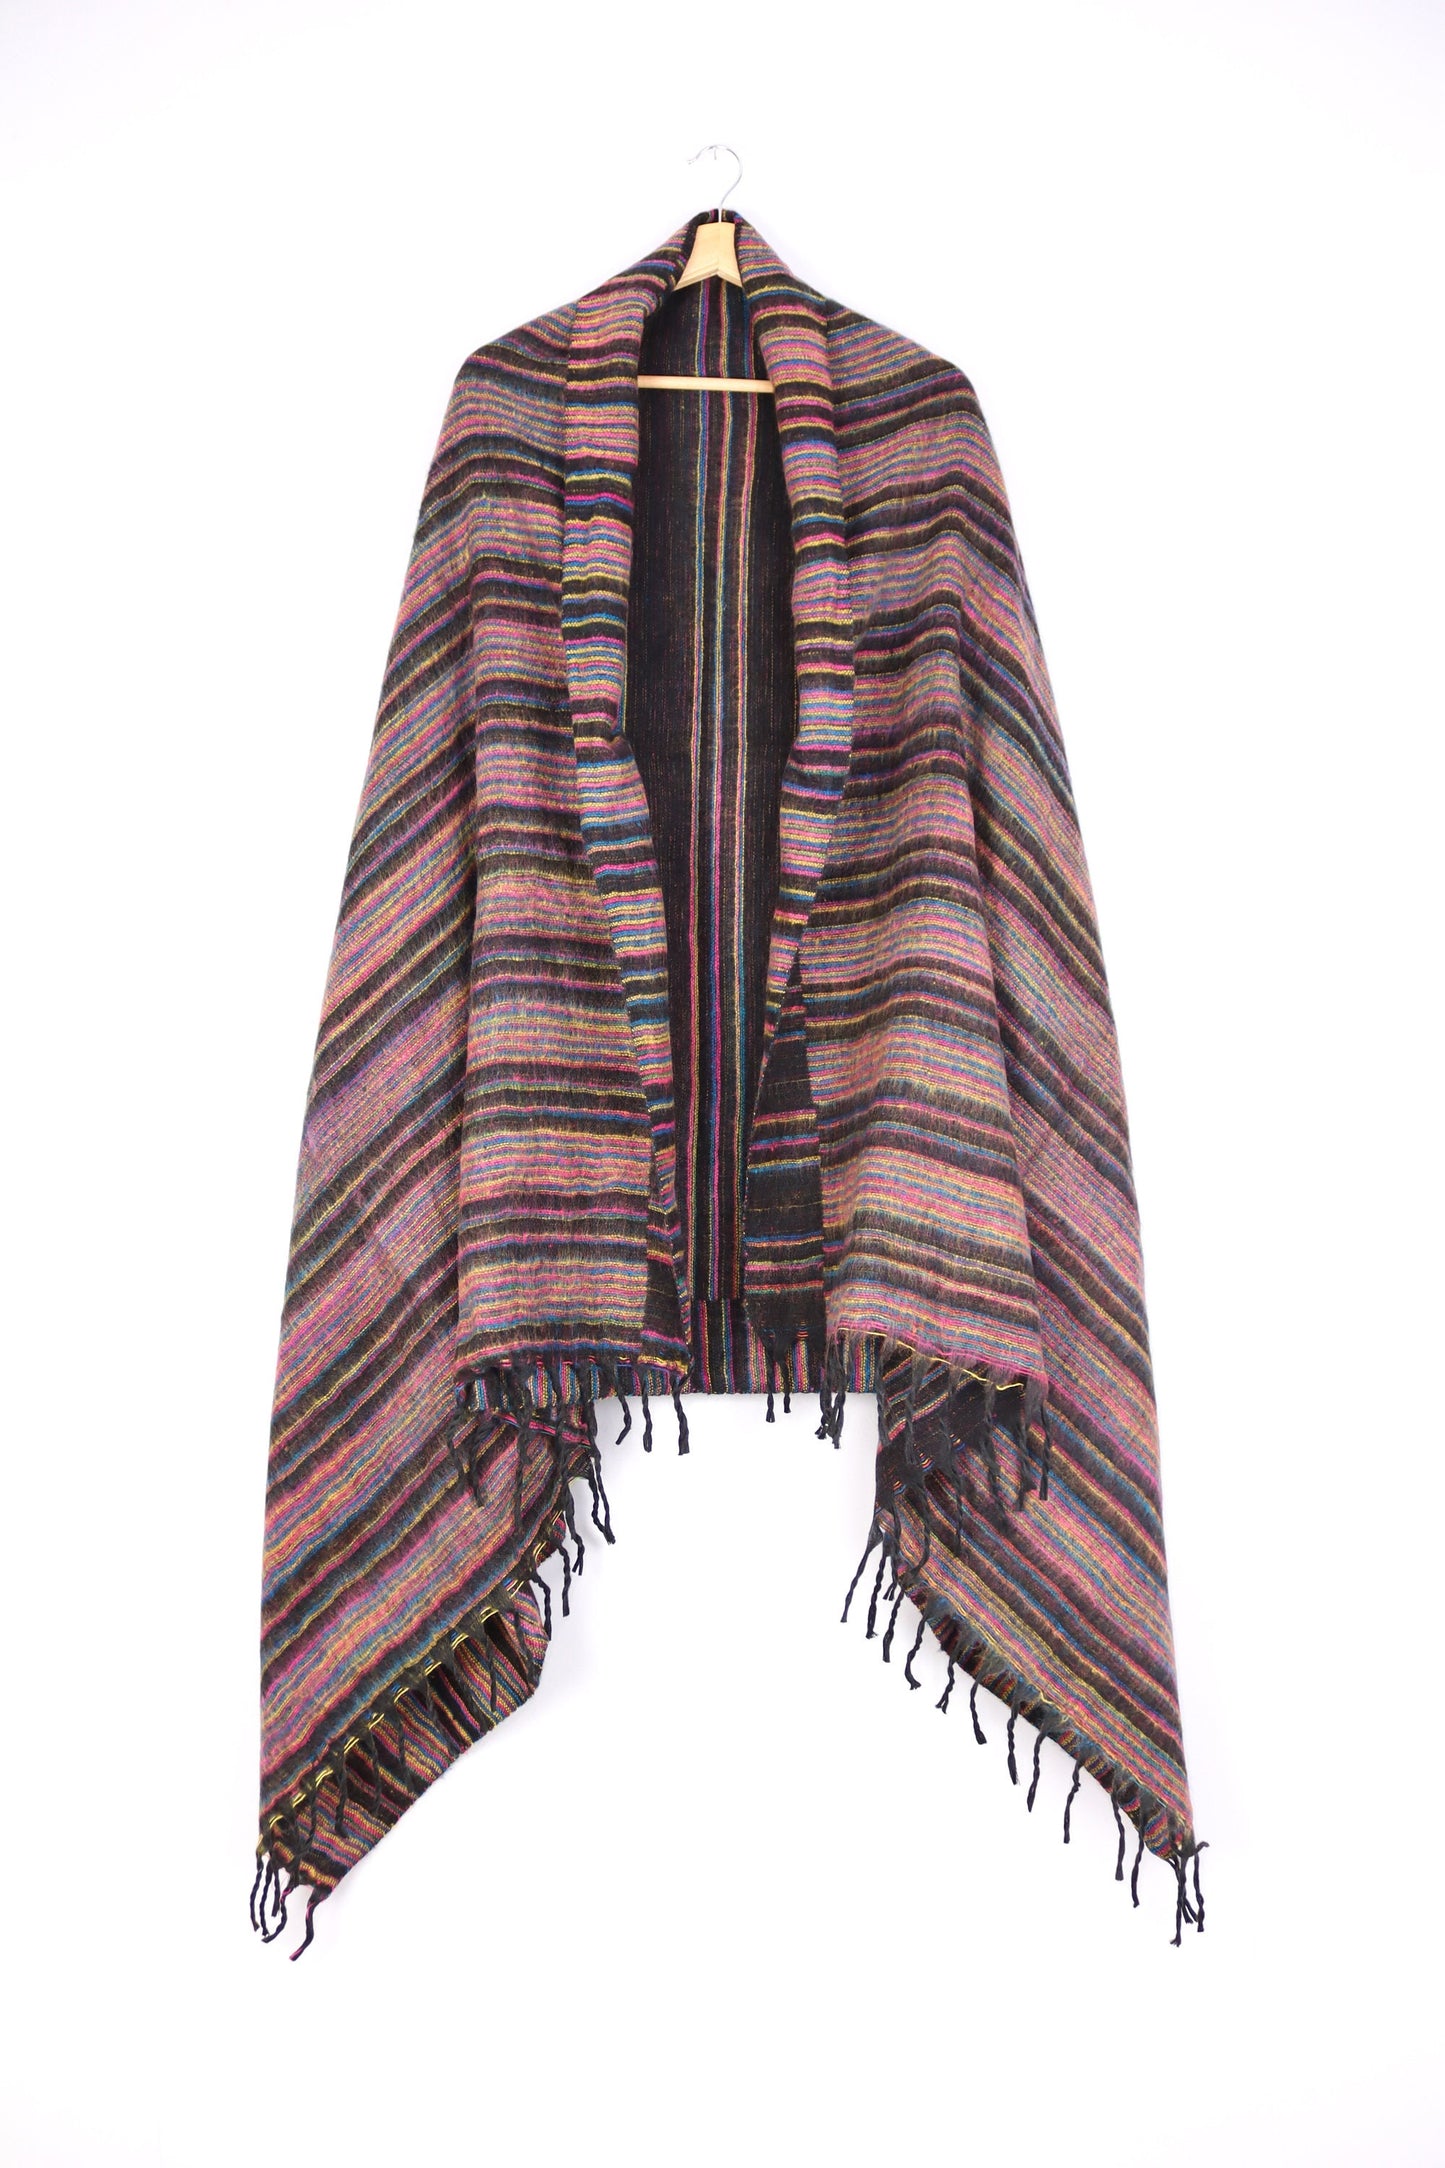 Blanket Scarf / Shawl / Throw - Black and Multi Coloured Striped - Bare Canvas